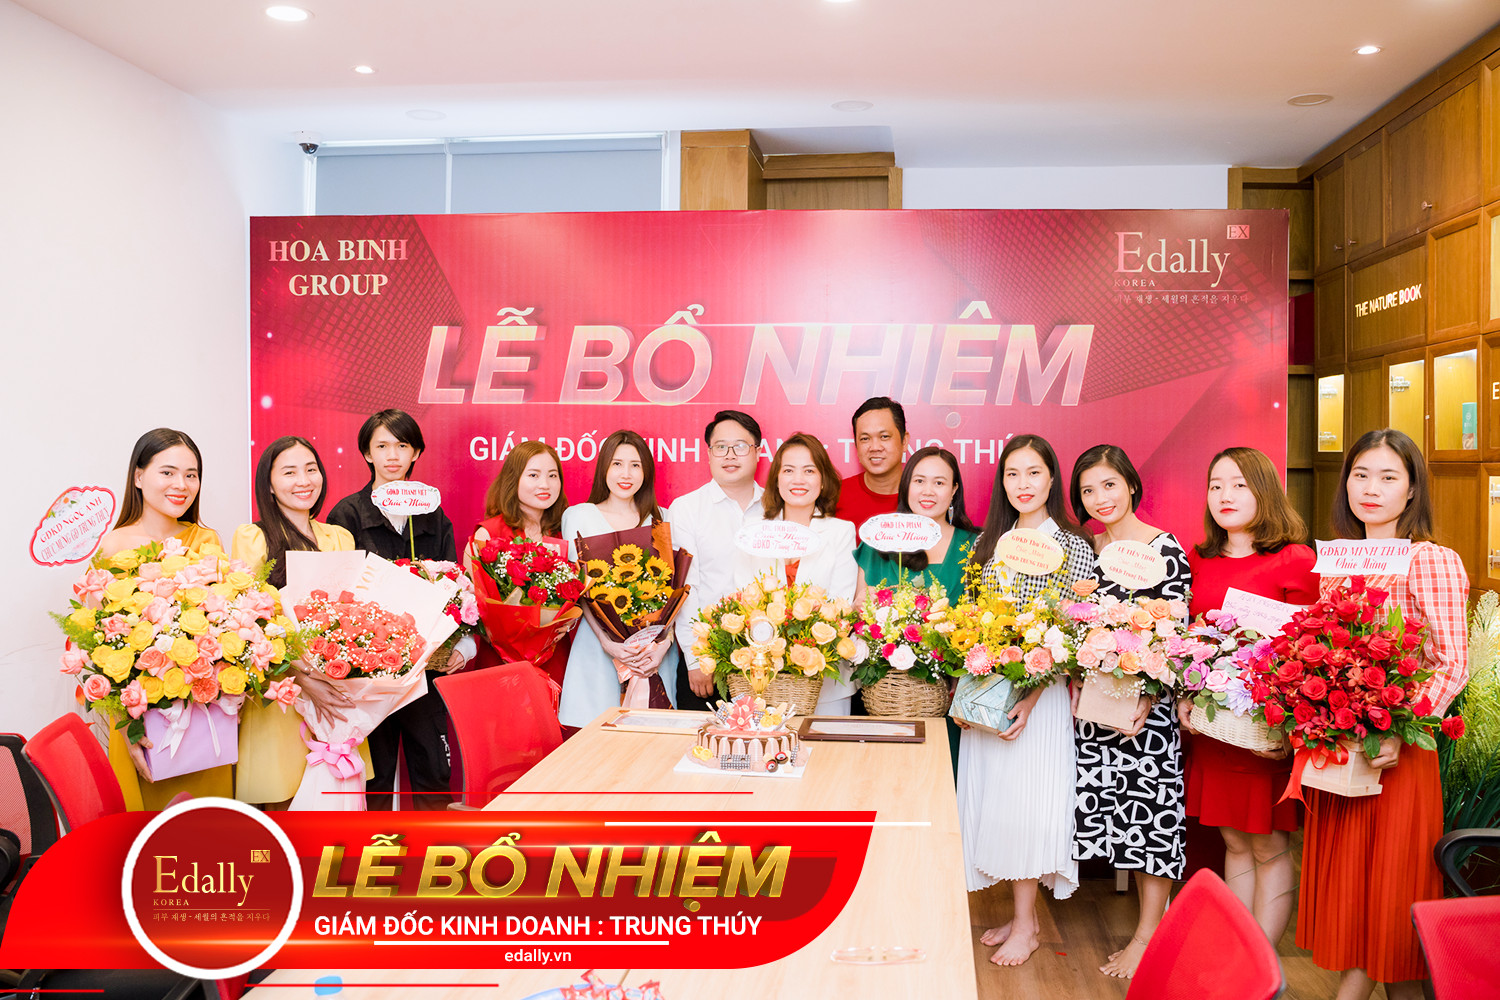 Trung Thuy was named Sales Director of Hoa Binh Group's Korean high-end intense skin regeneration cosmetics Edally EX in May 2022.